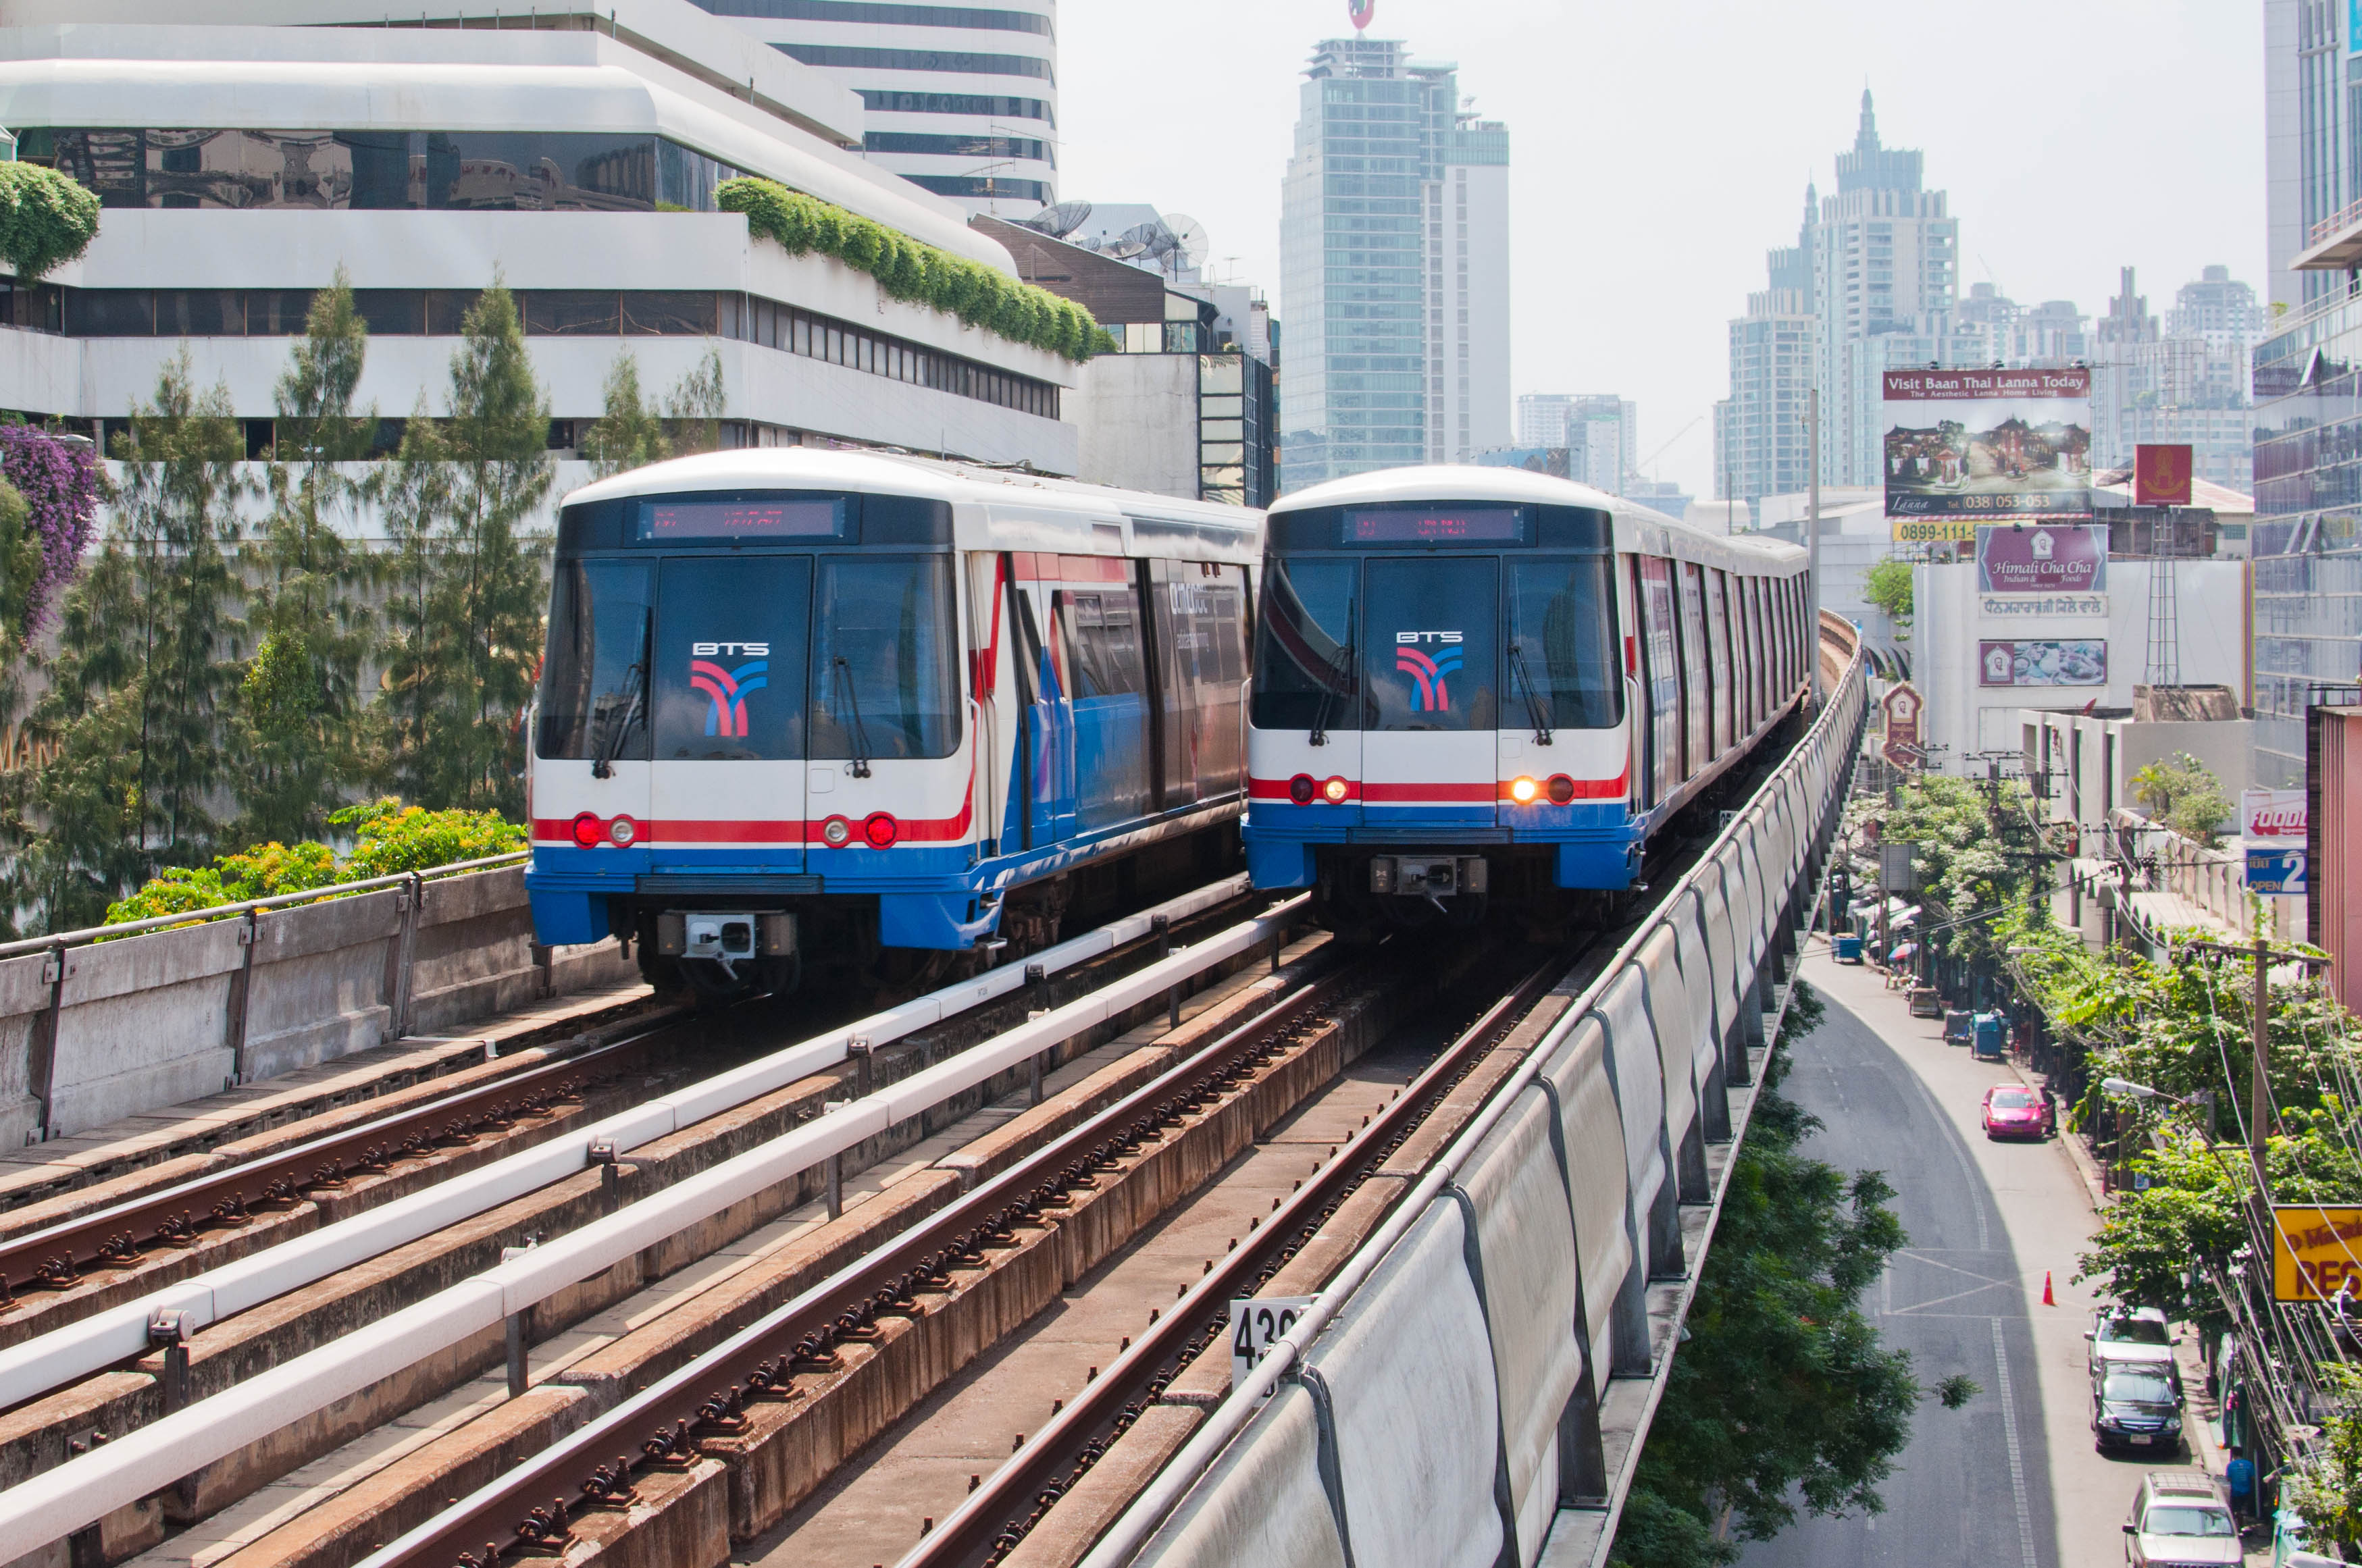 Two BTS SkyTrains pass each other at the Nana station on the Sukhumvit Line.